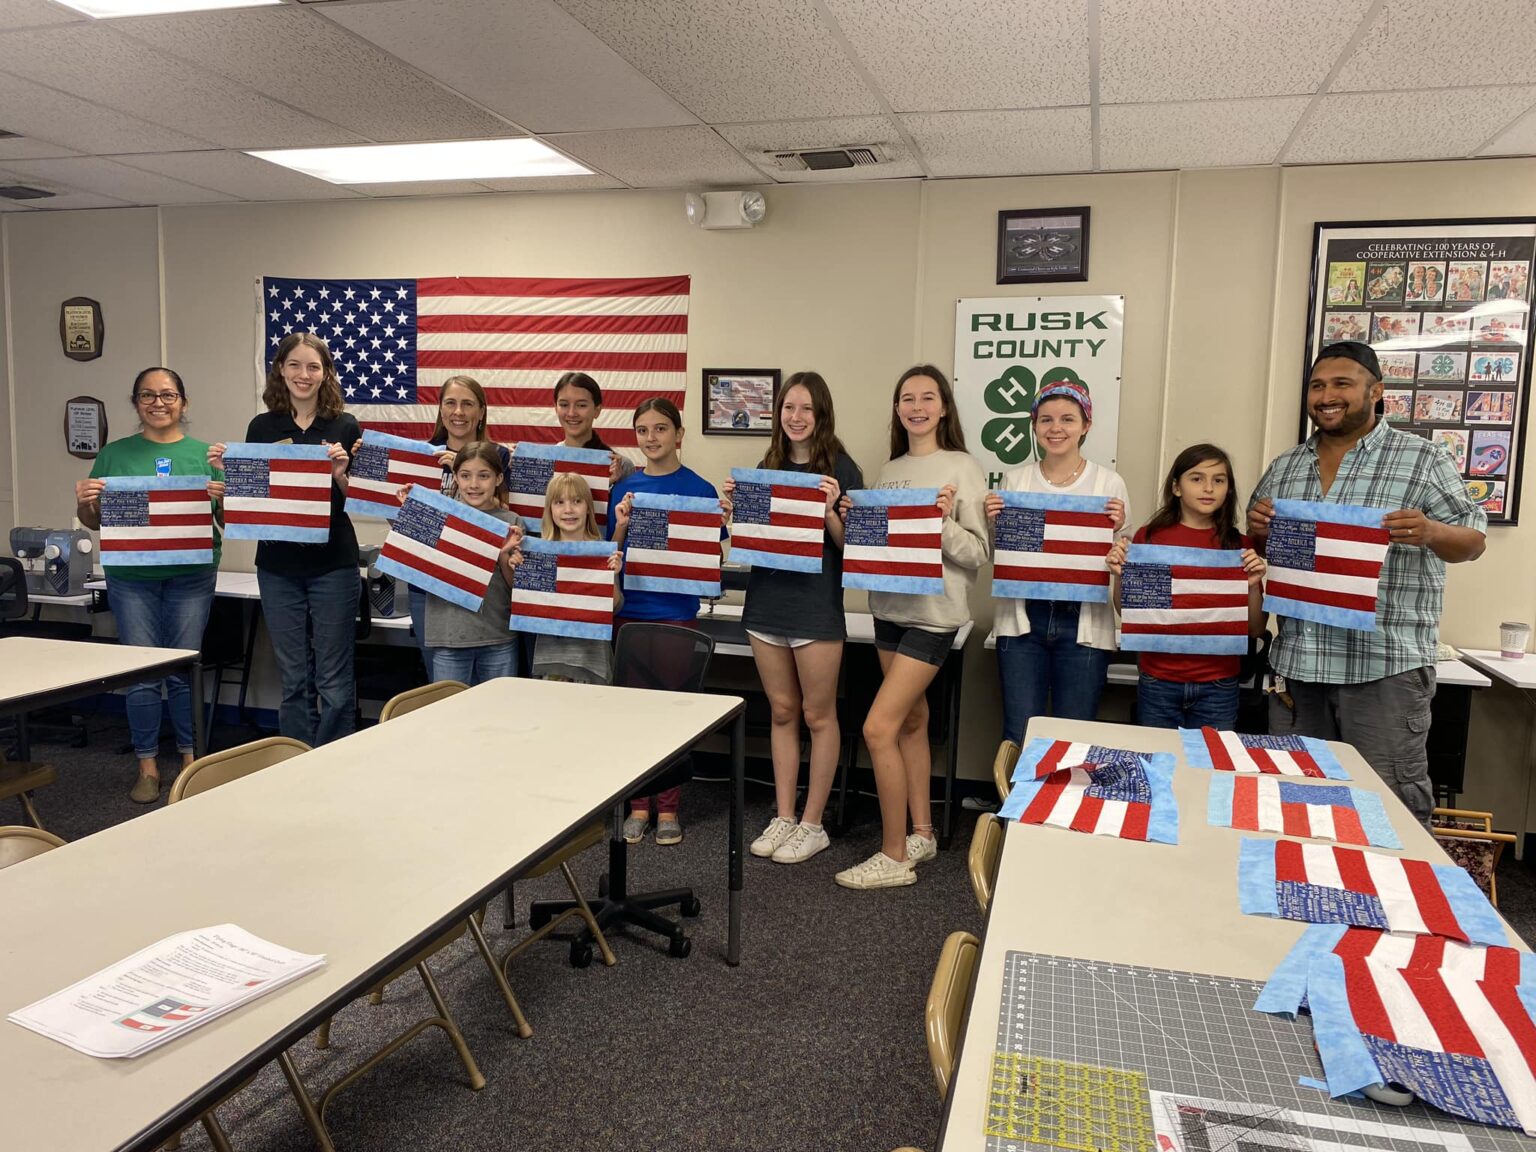 Texas 4-H members in Rusk County recently produced quilts to be awarded to three WWII veterans during Military Appreciation Month. (Liz Buckner-Cross/Texas A&M AgriLife)